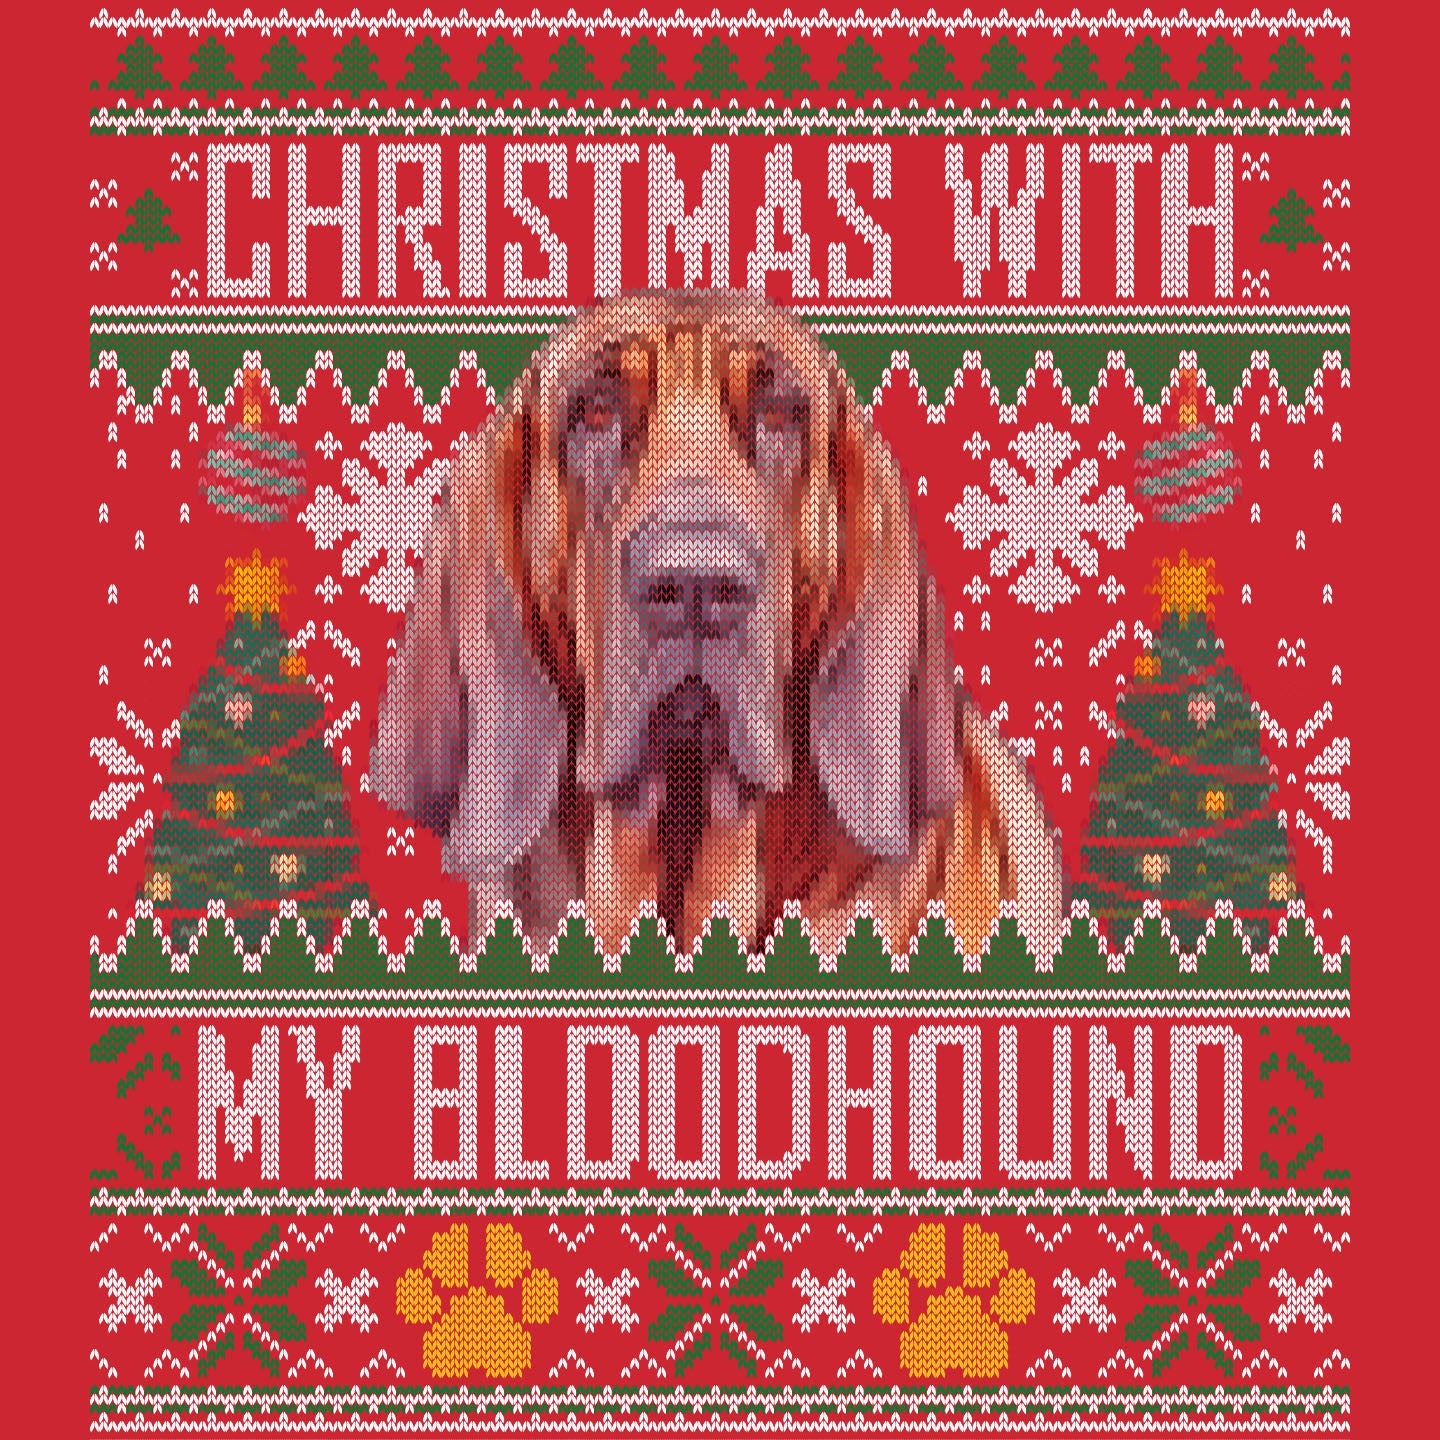 Ugly Sweater Christmas with My Bloodhound - Adult Unisex Long Sleeve T-Shirt